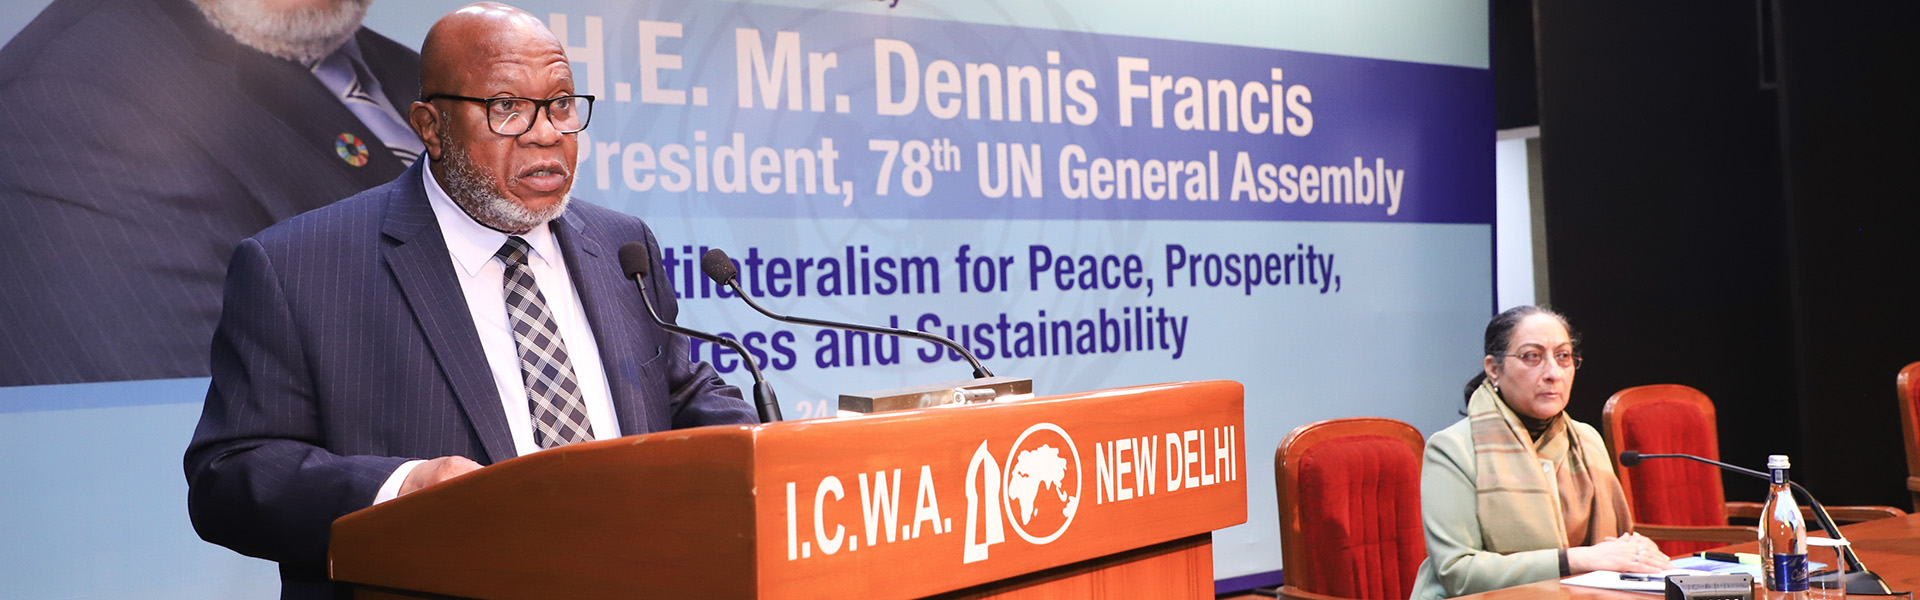 H.E. Mr. Dennis Francis, President, 78th UN General Assembly (UNGA) delivered 47th Sapru House Lecture on ‘Multilateralism for Peace, Prosperity, Progress and Sustainability’ at Sapru House, 24 January 2024